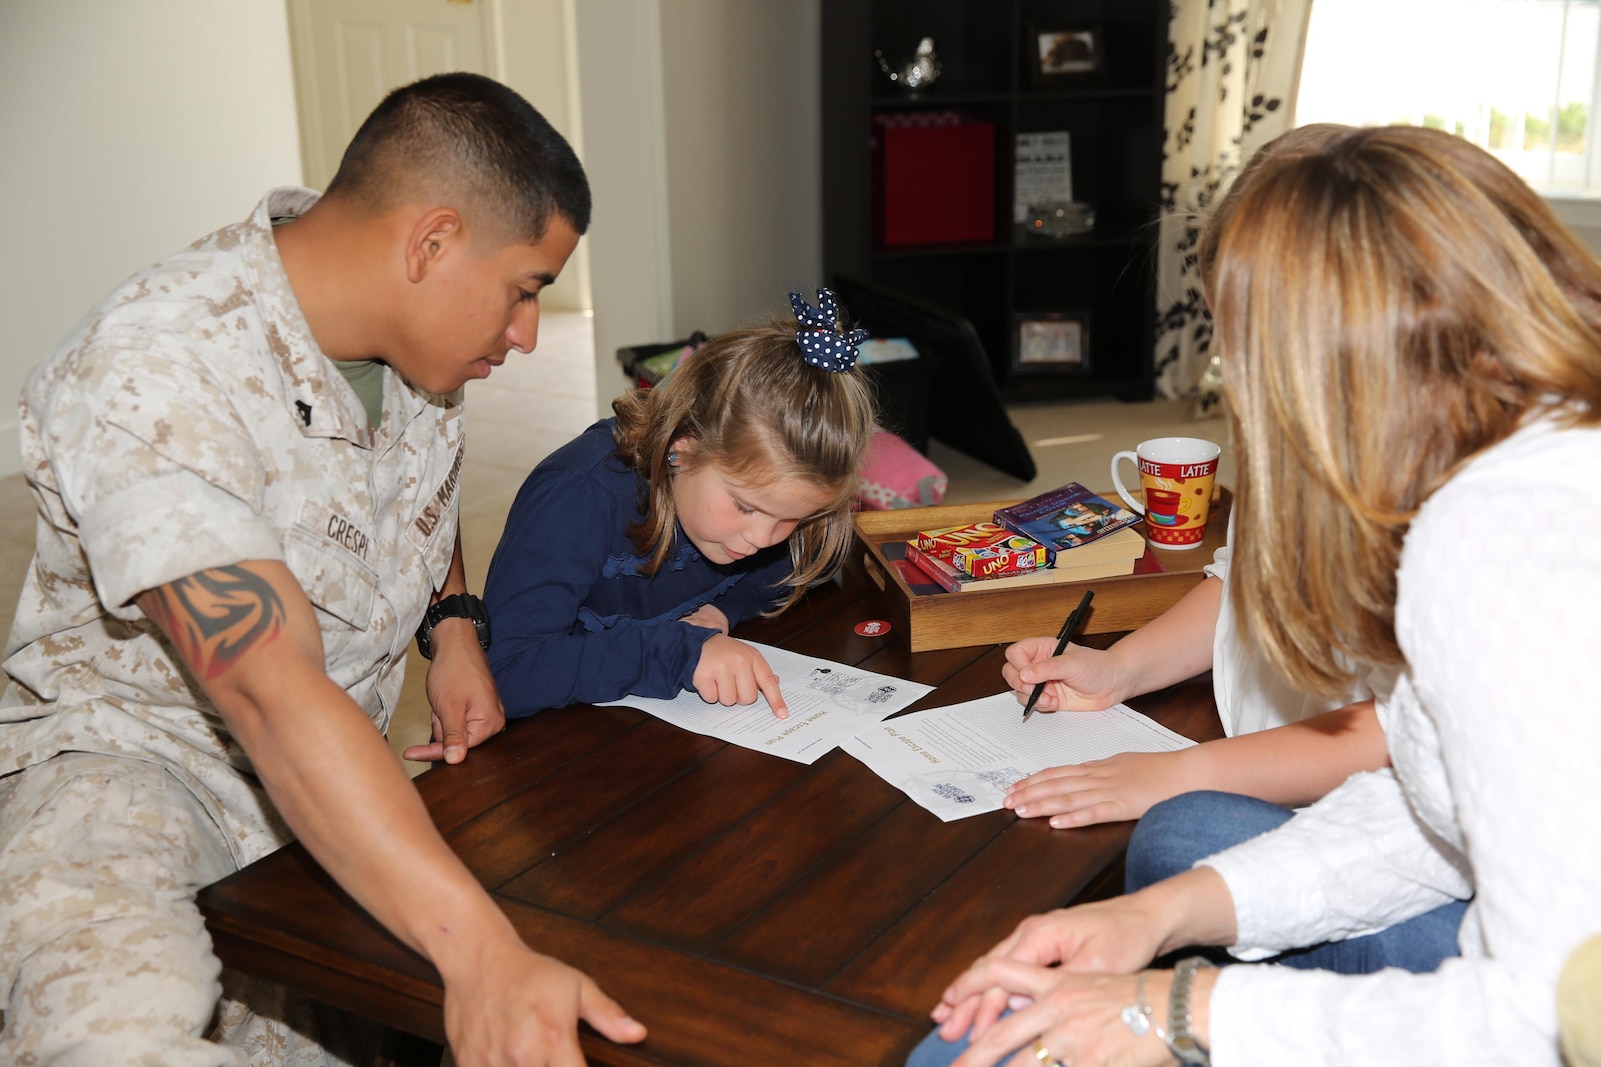 Marine families are mobile and at times may not be together in one place when a disaster happens. Getting to a safe location and regaining contact is critical in such instances. A family emergency plan ensures everyone knows what to do, where to meet, and who to check in with if faced with various emergencies.  